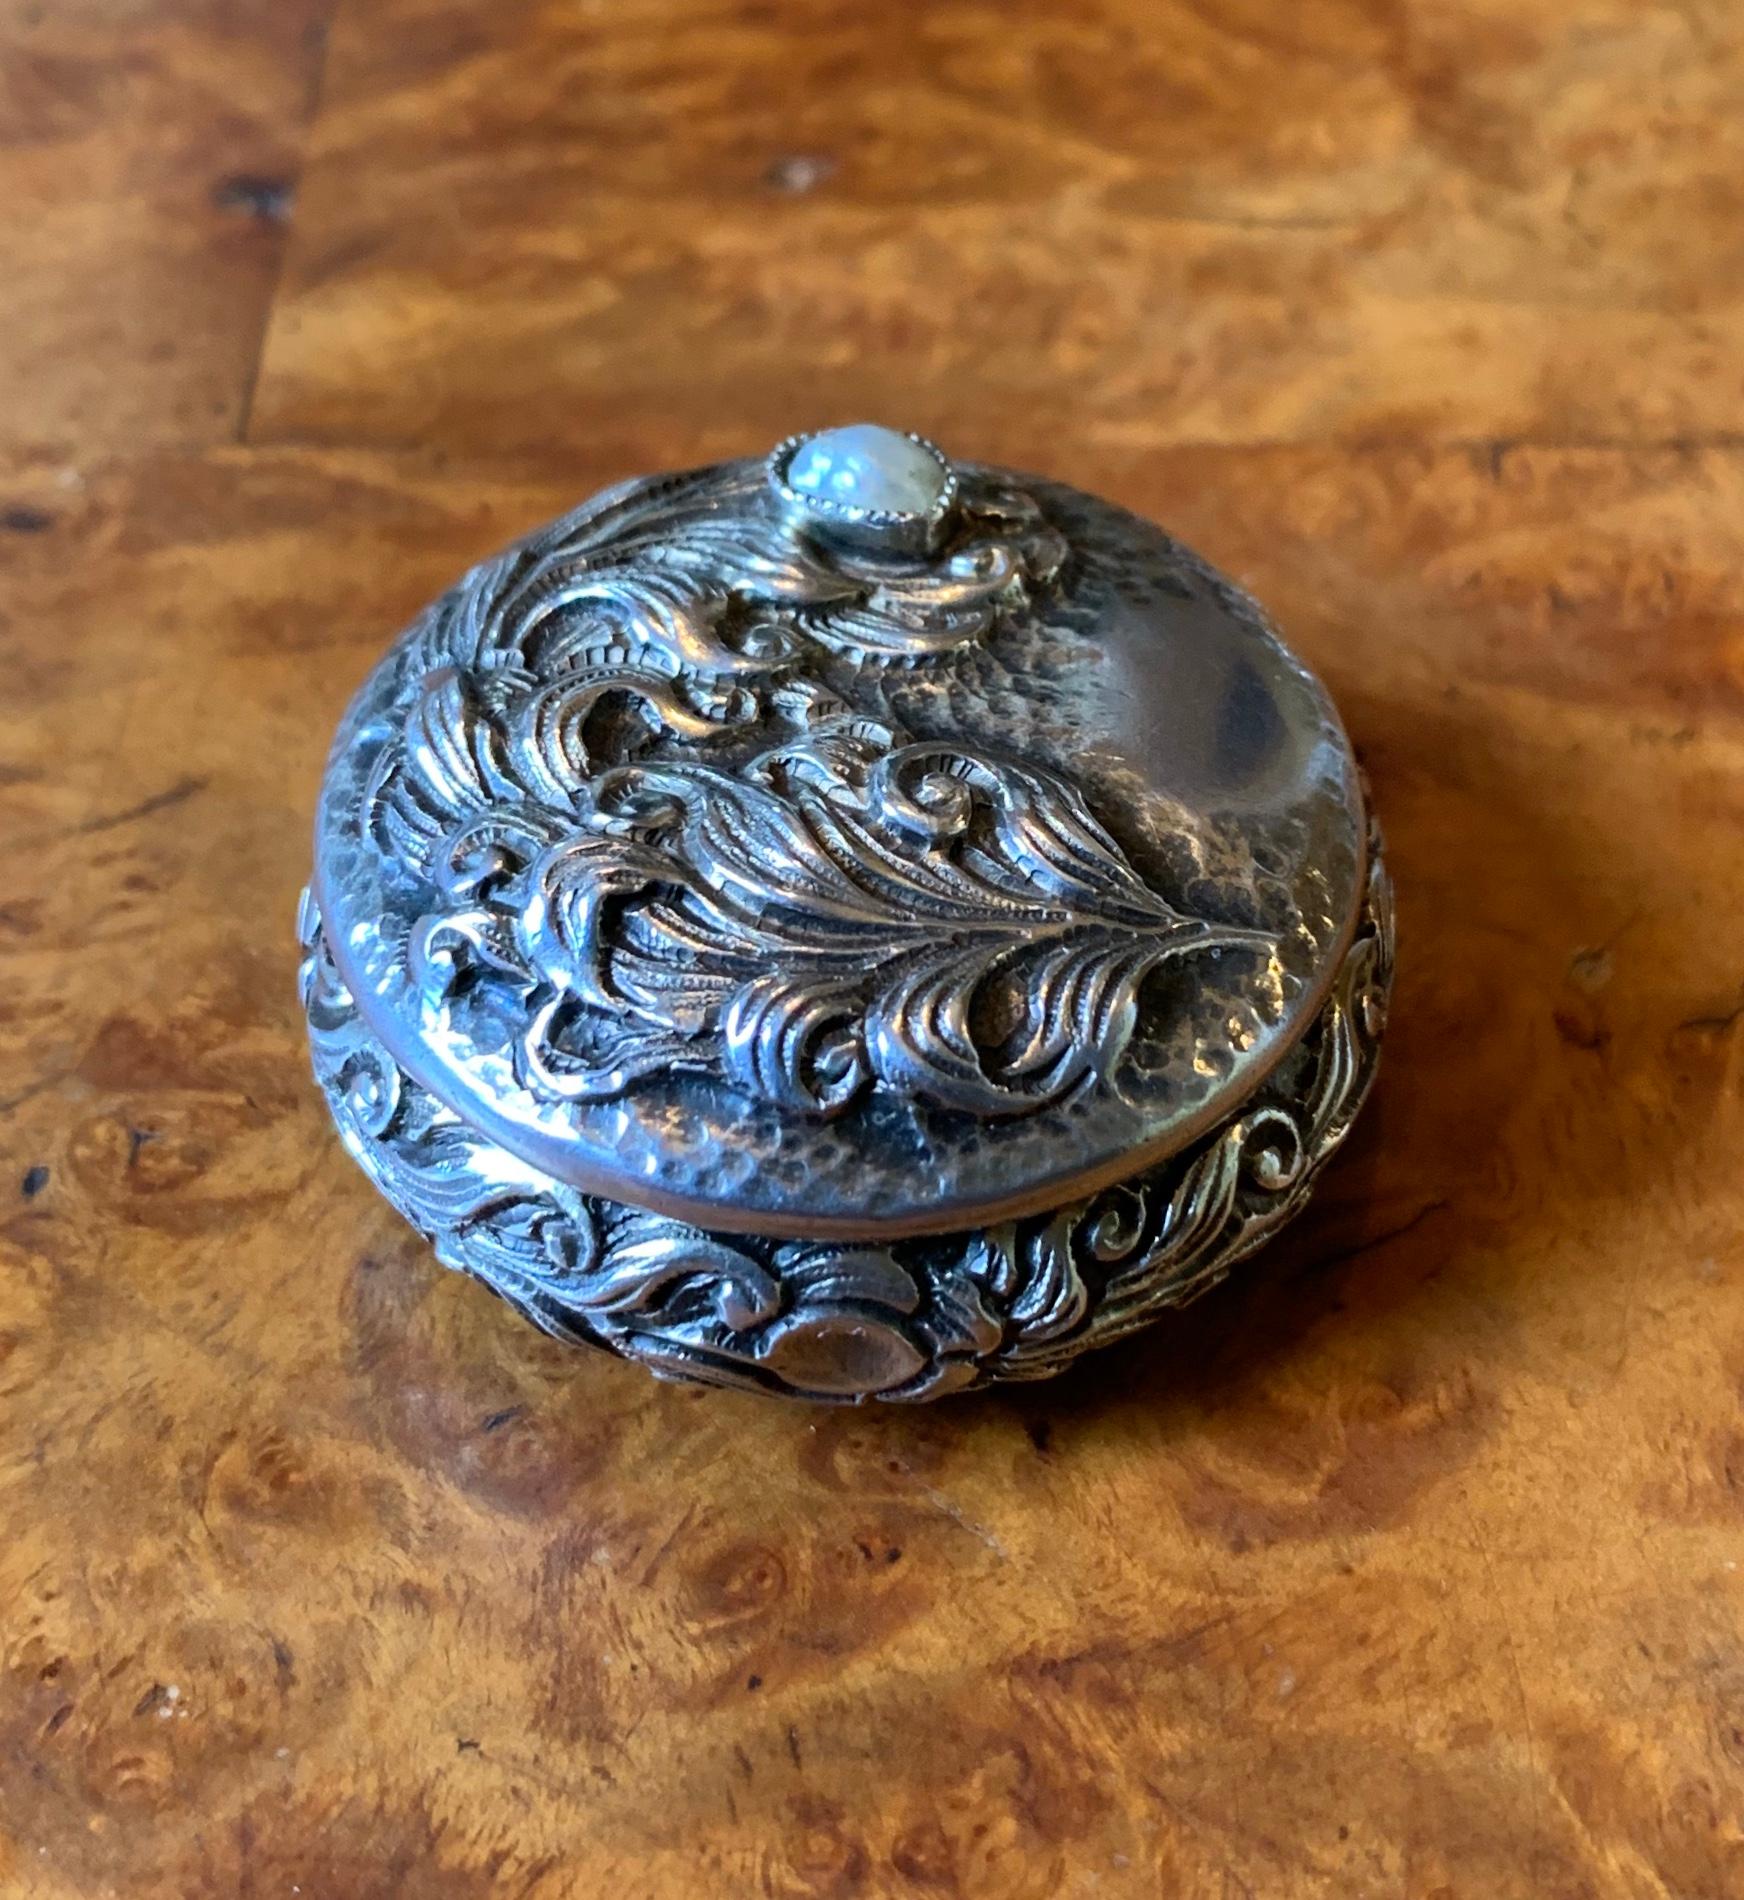 THIS IS A GORGEOUS VICTORIAN - BELLE EPOQUE LOCKET PENDANT OR JEWELRY, RING OR PILL BOX IN SILVER WITH A BEAUTIFUL DEEP REPOUSSE DESIGN OF PEACOCK FEATHERS, FLOWER AND ACANTHUS LEAF MOTIFS ON THE TOP AND AROUND THE SIDES OF THE LOCKET, WHICH IS ALSO